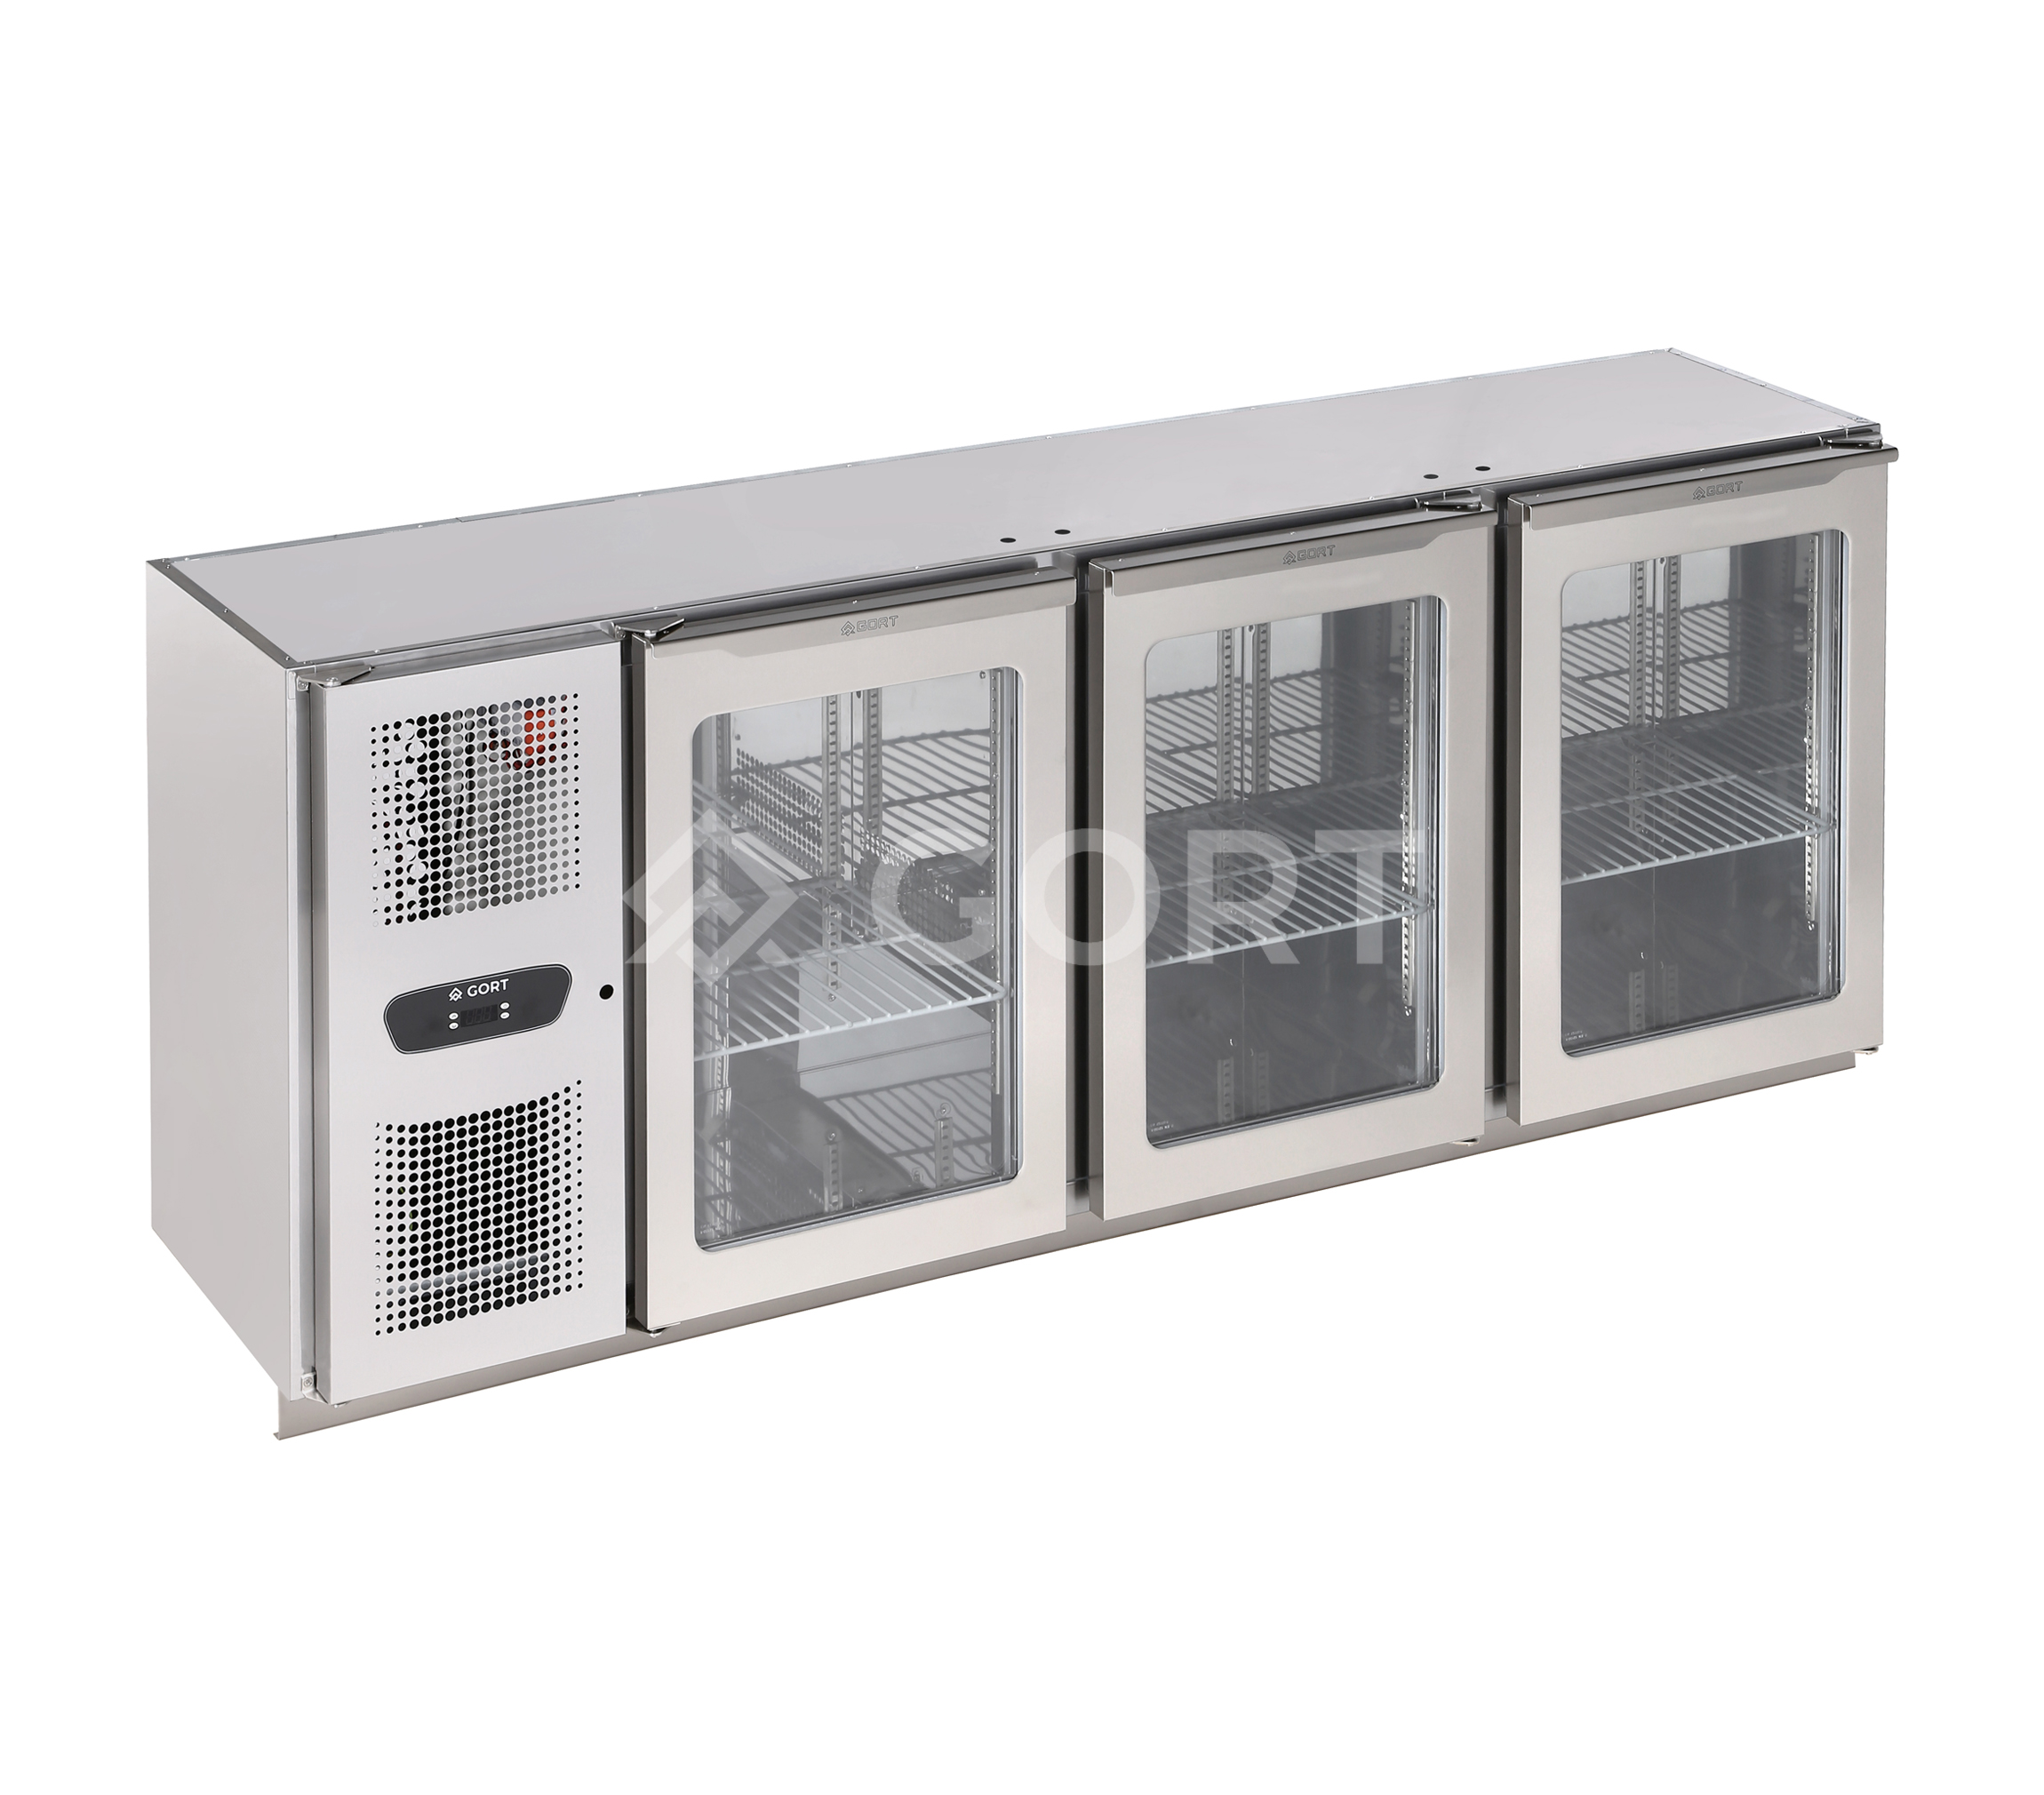 BAR COUNTER REFRIGERATOR with 3 glass doors – compressor on the side